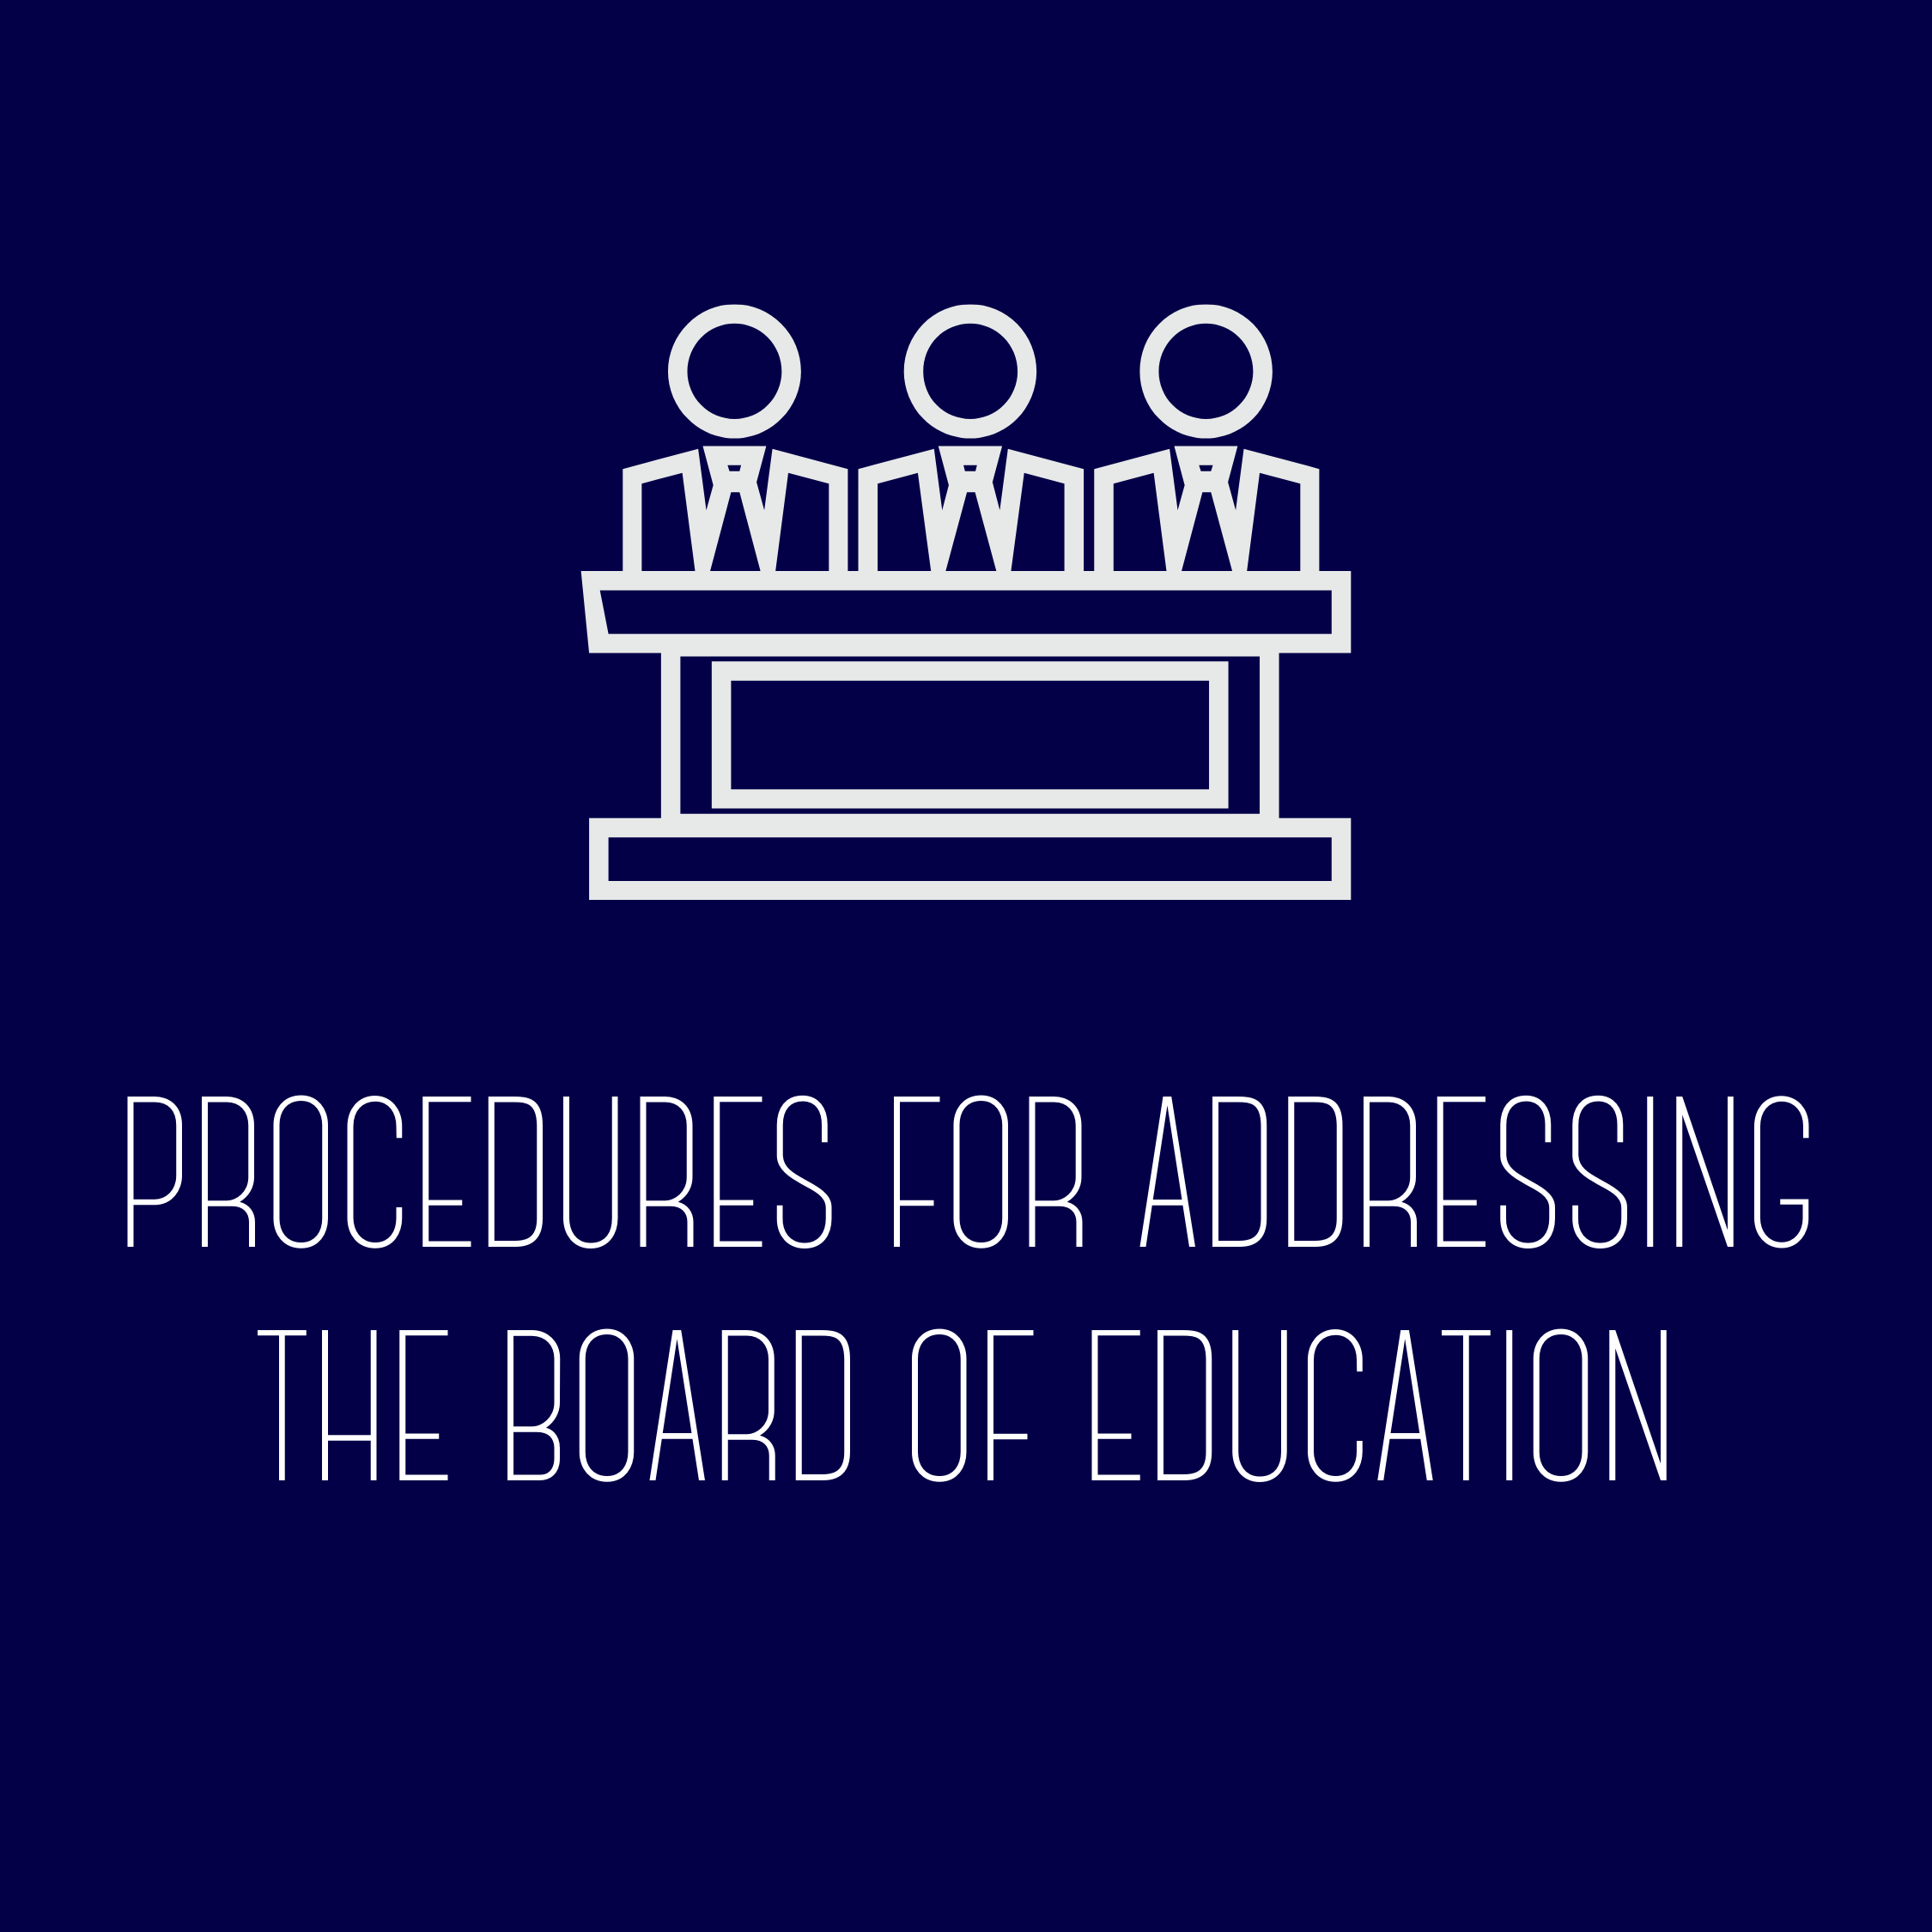 Procedures for Addressing the Board